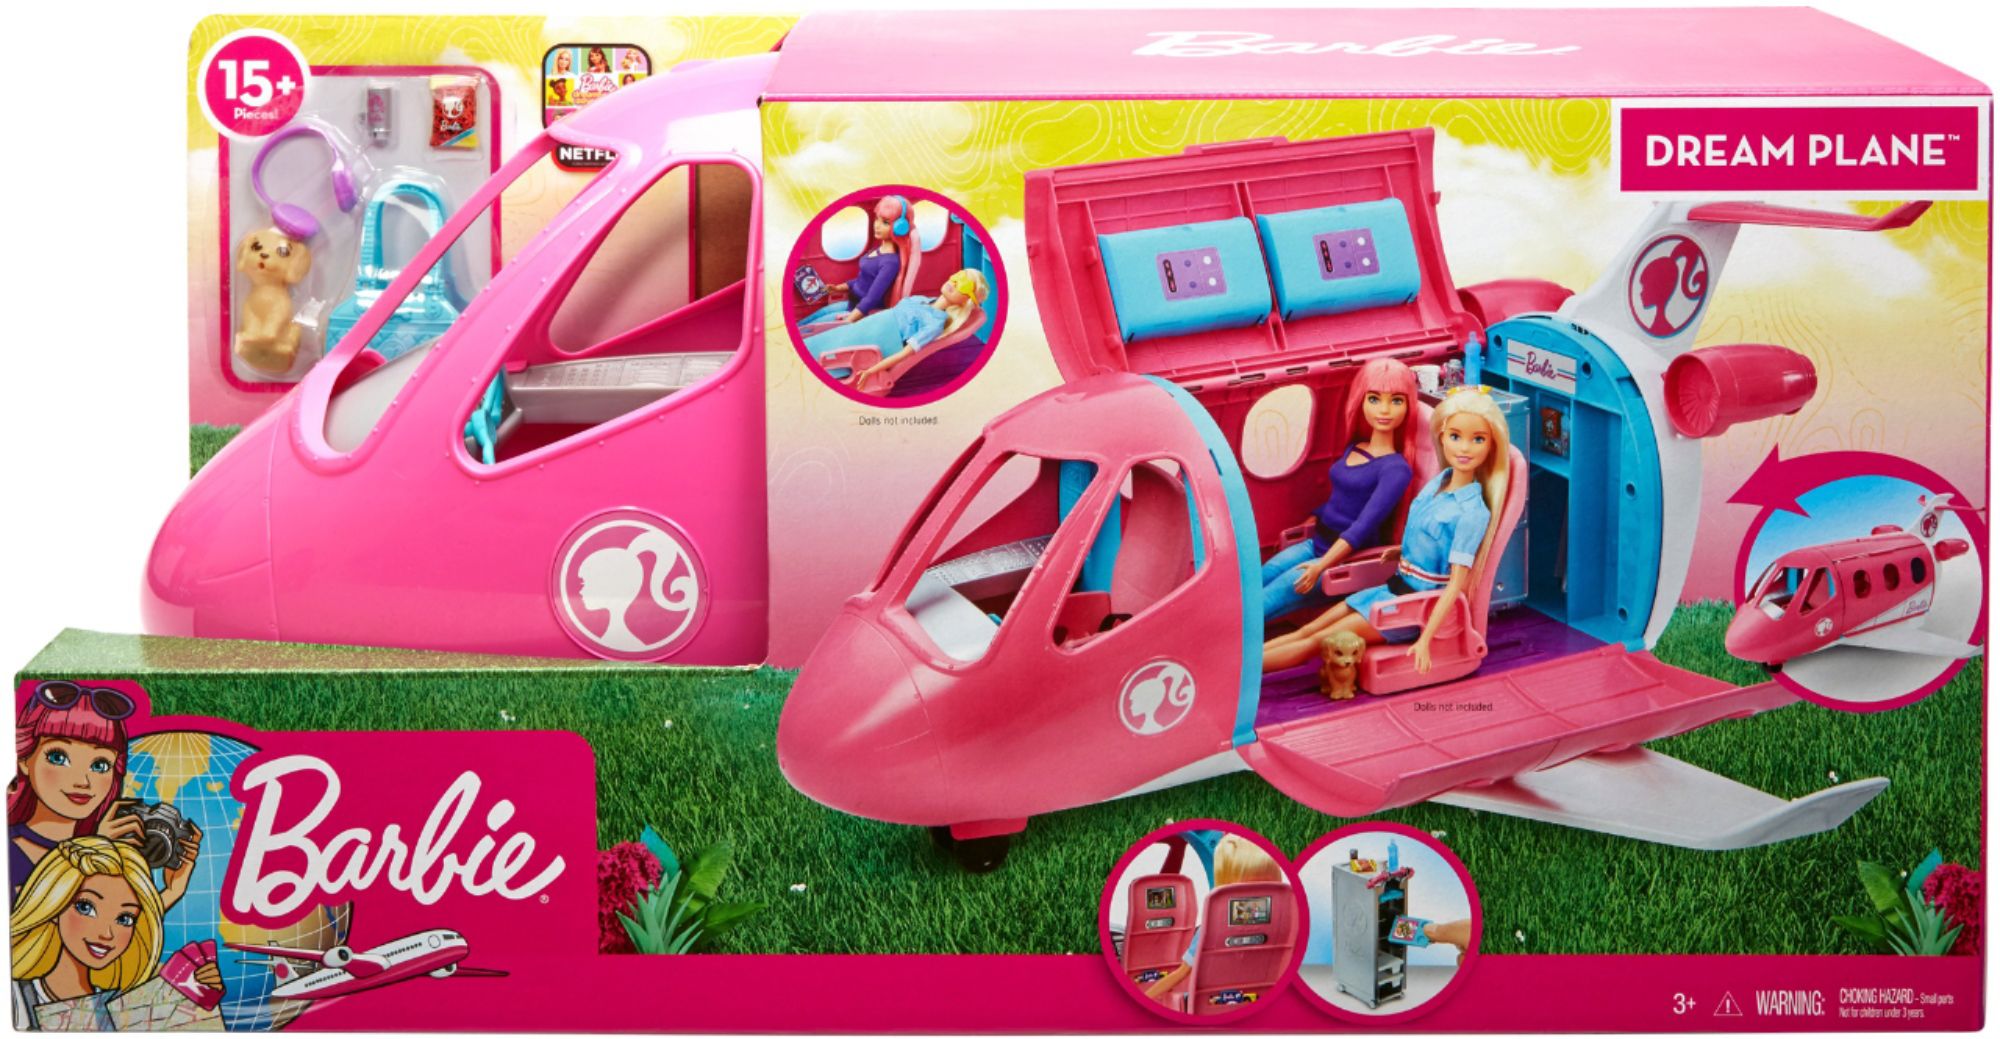 barbie products